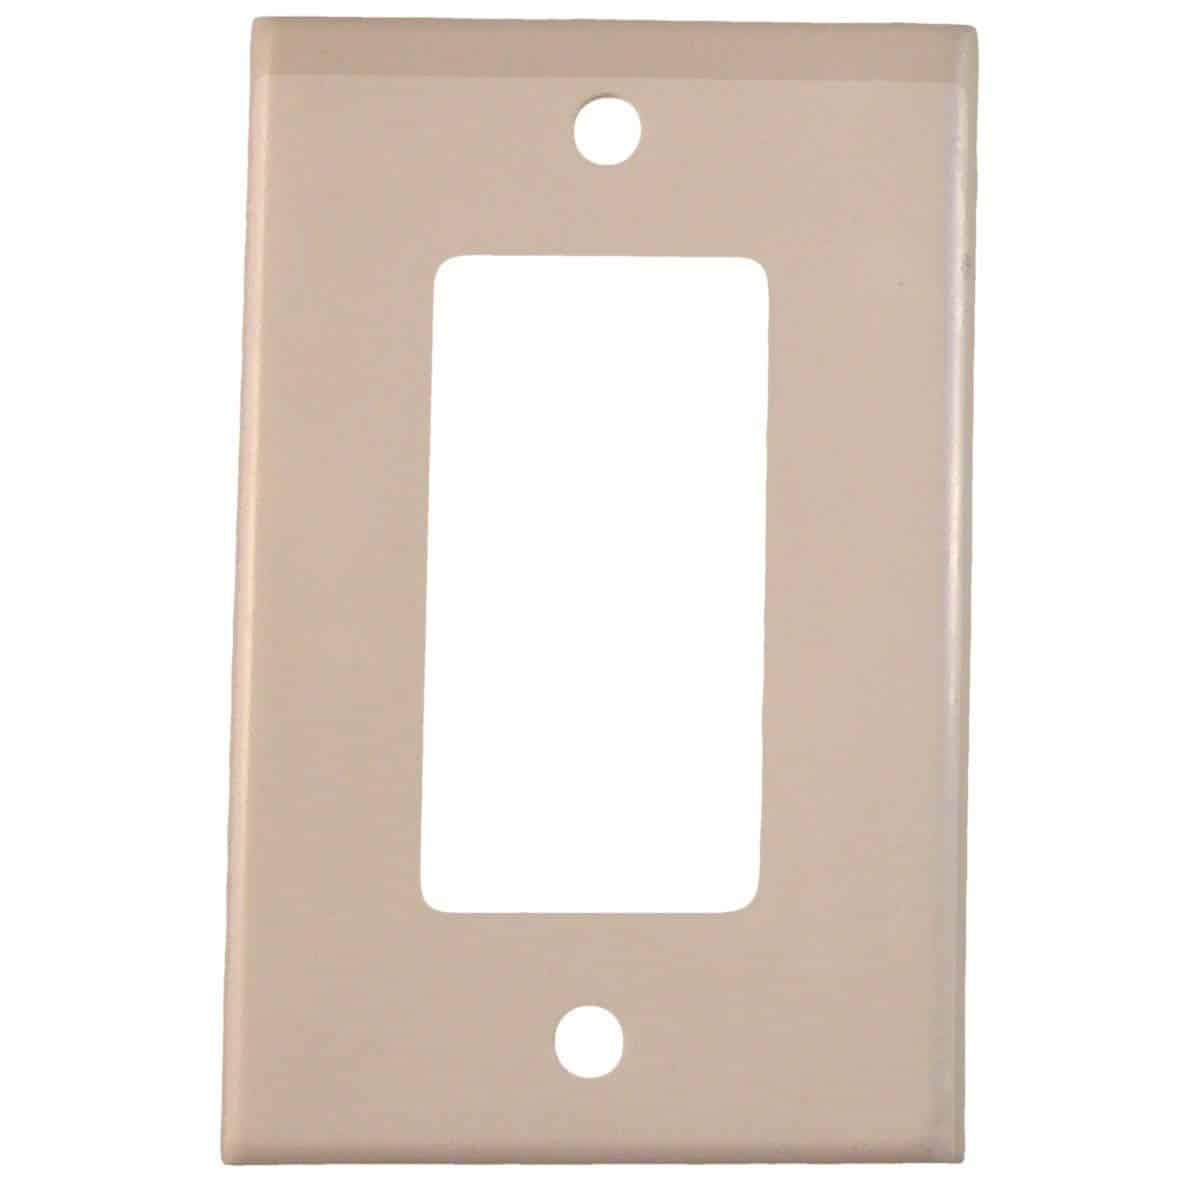 https://www.cableprotectorworks.com/wp-content/uploads/imported/Glow-in-the-Dark-Safety-1-Gang-Wall-Cover-Plate-White-Plastic-Standard-Size-for-Single-Rocker-SwitchDecoraGFCI-Dev-B07CS1J1KW-4.jpg